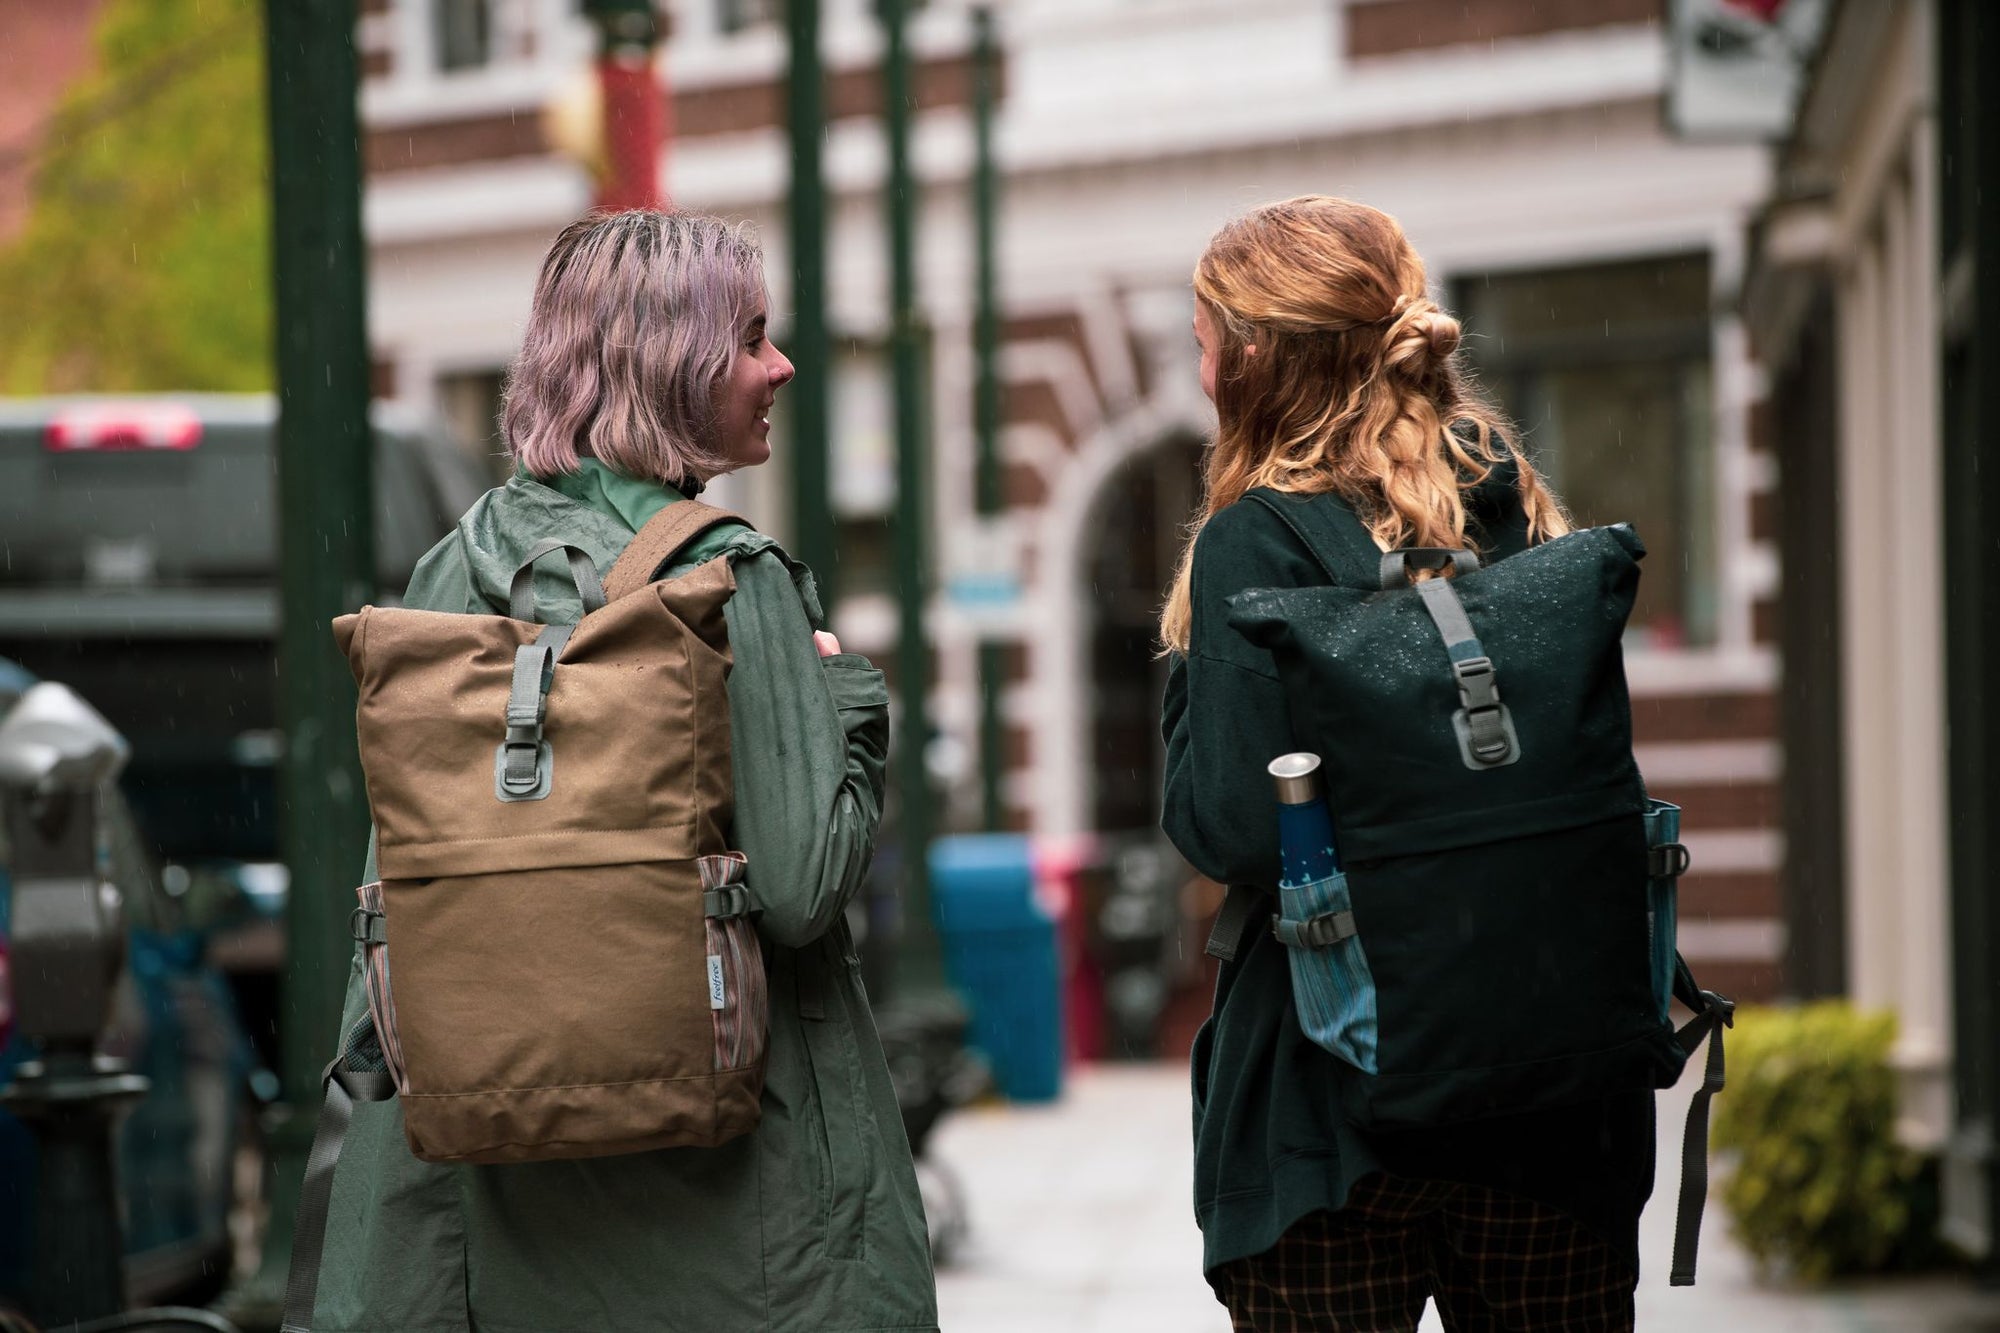 Feelfree Gear Announces New Line of Lifestyle Bags Inspired by Craft Culture